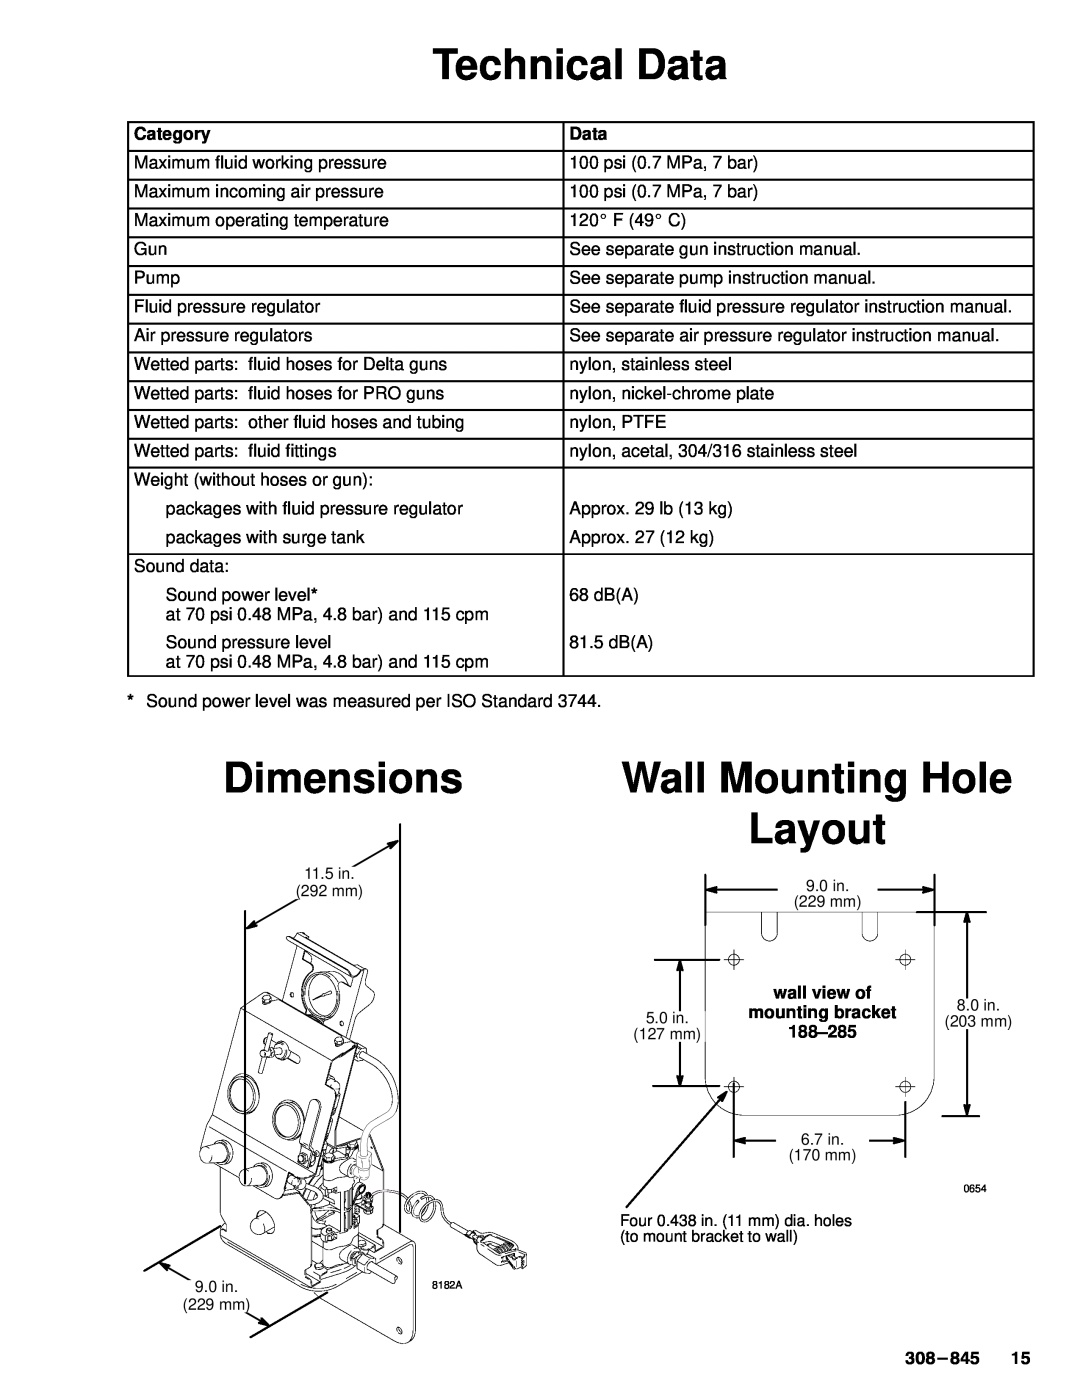 Graco Inc 240361 Technical Data, Dimensions, Wall Mounting Hole Layout, Category, wall view of, mounting bracket, 188-285 